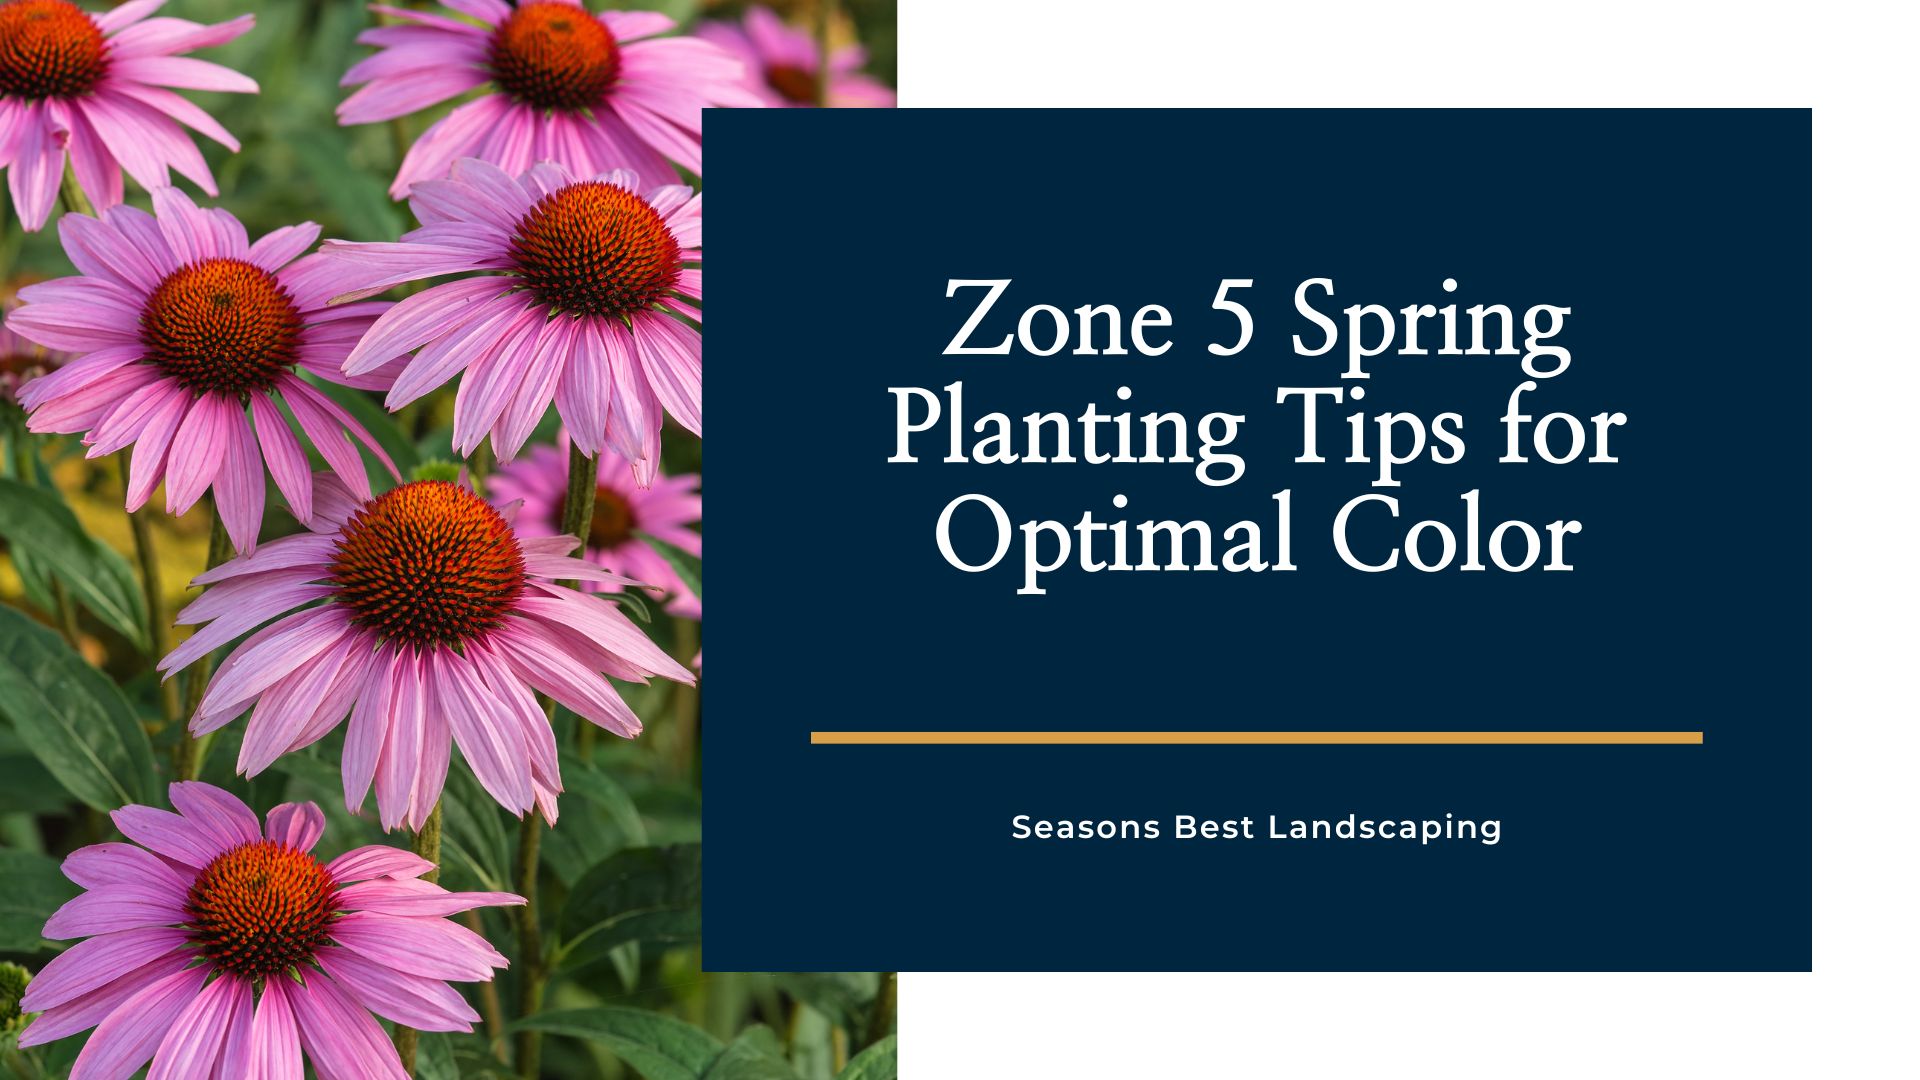 Zone 5 Spring Planting Tips for Optimal Color - Seasons Best Landscaping